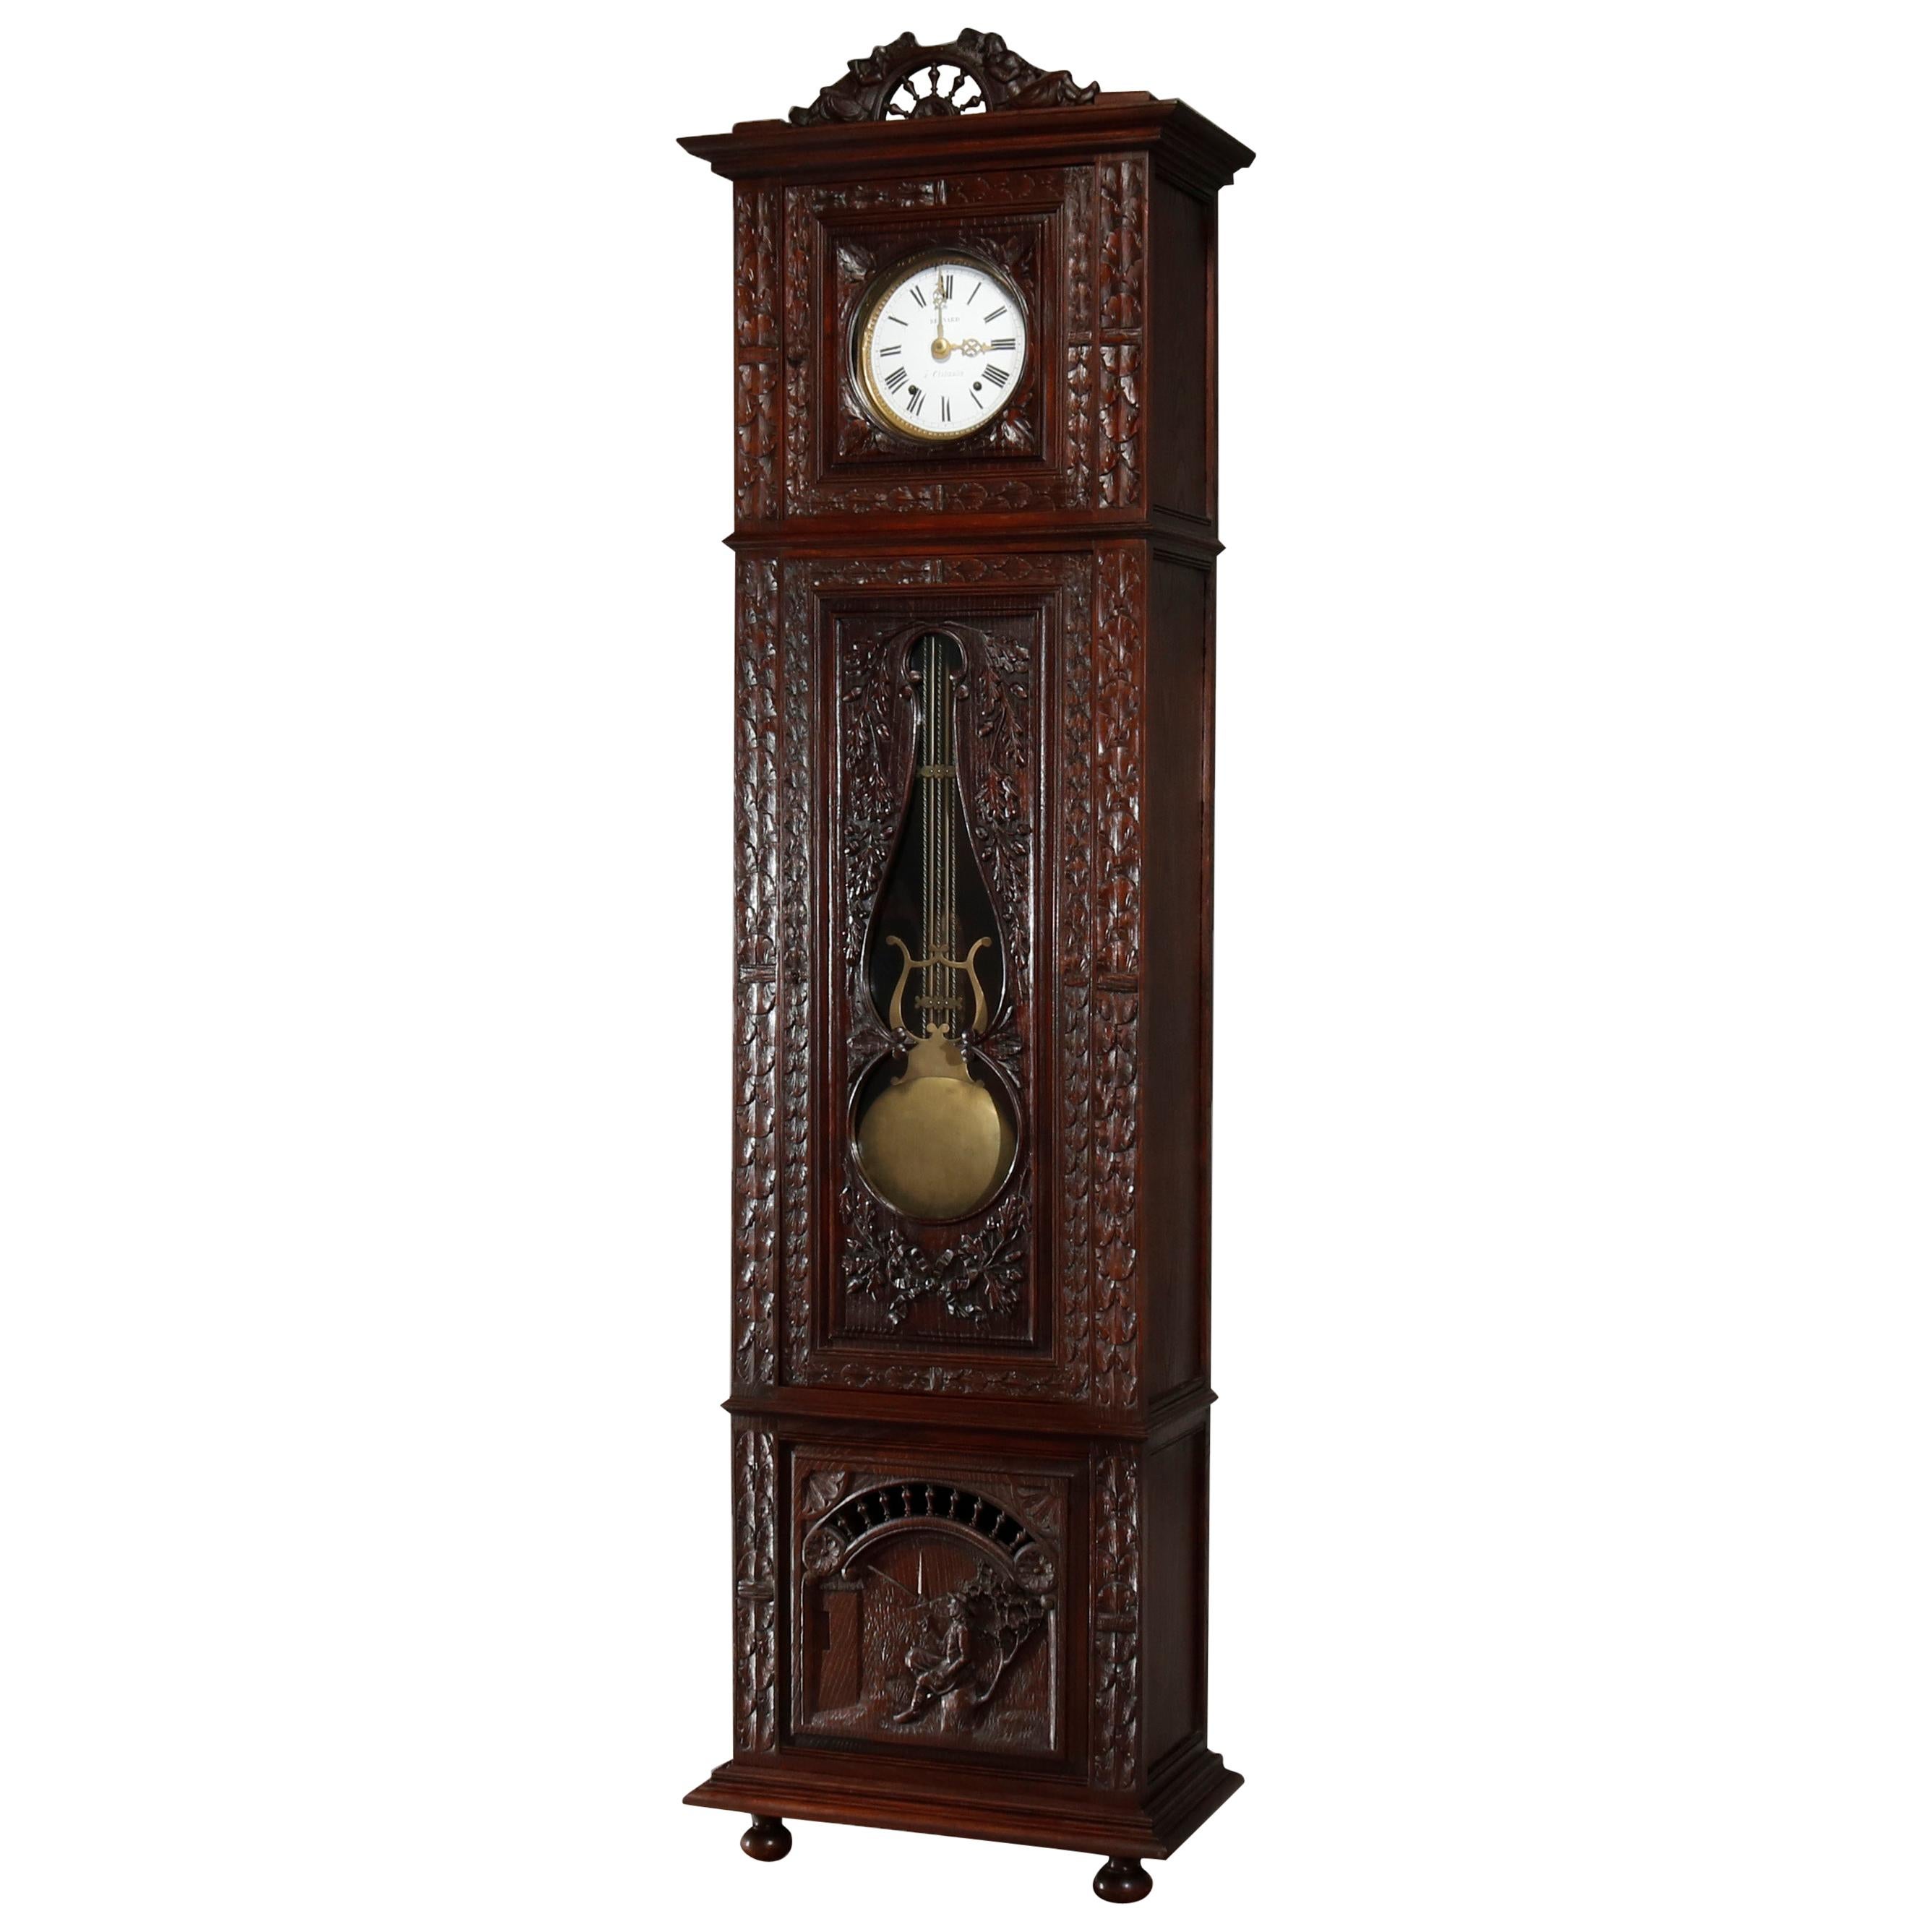 Antique French Figural High Relief Deeply Carved Oak Tall Case Clock, circa 1890